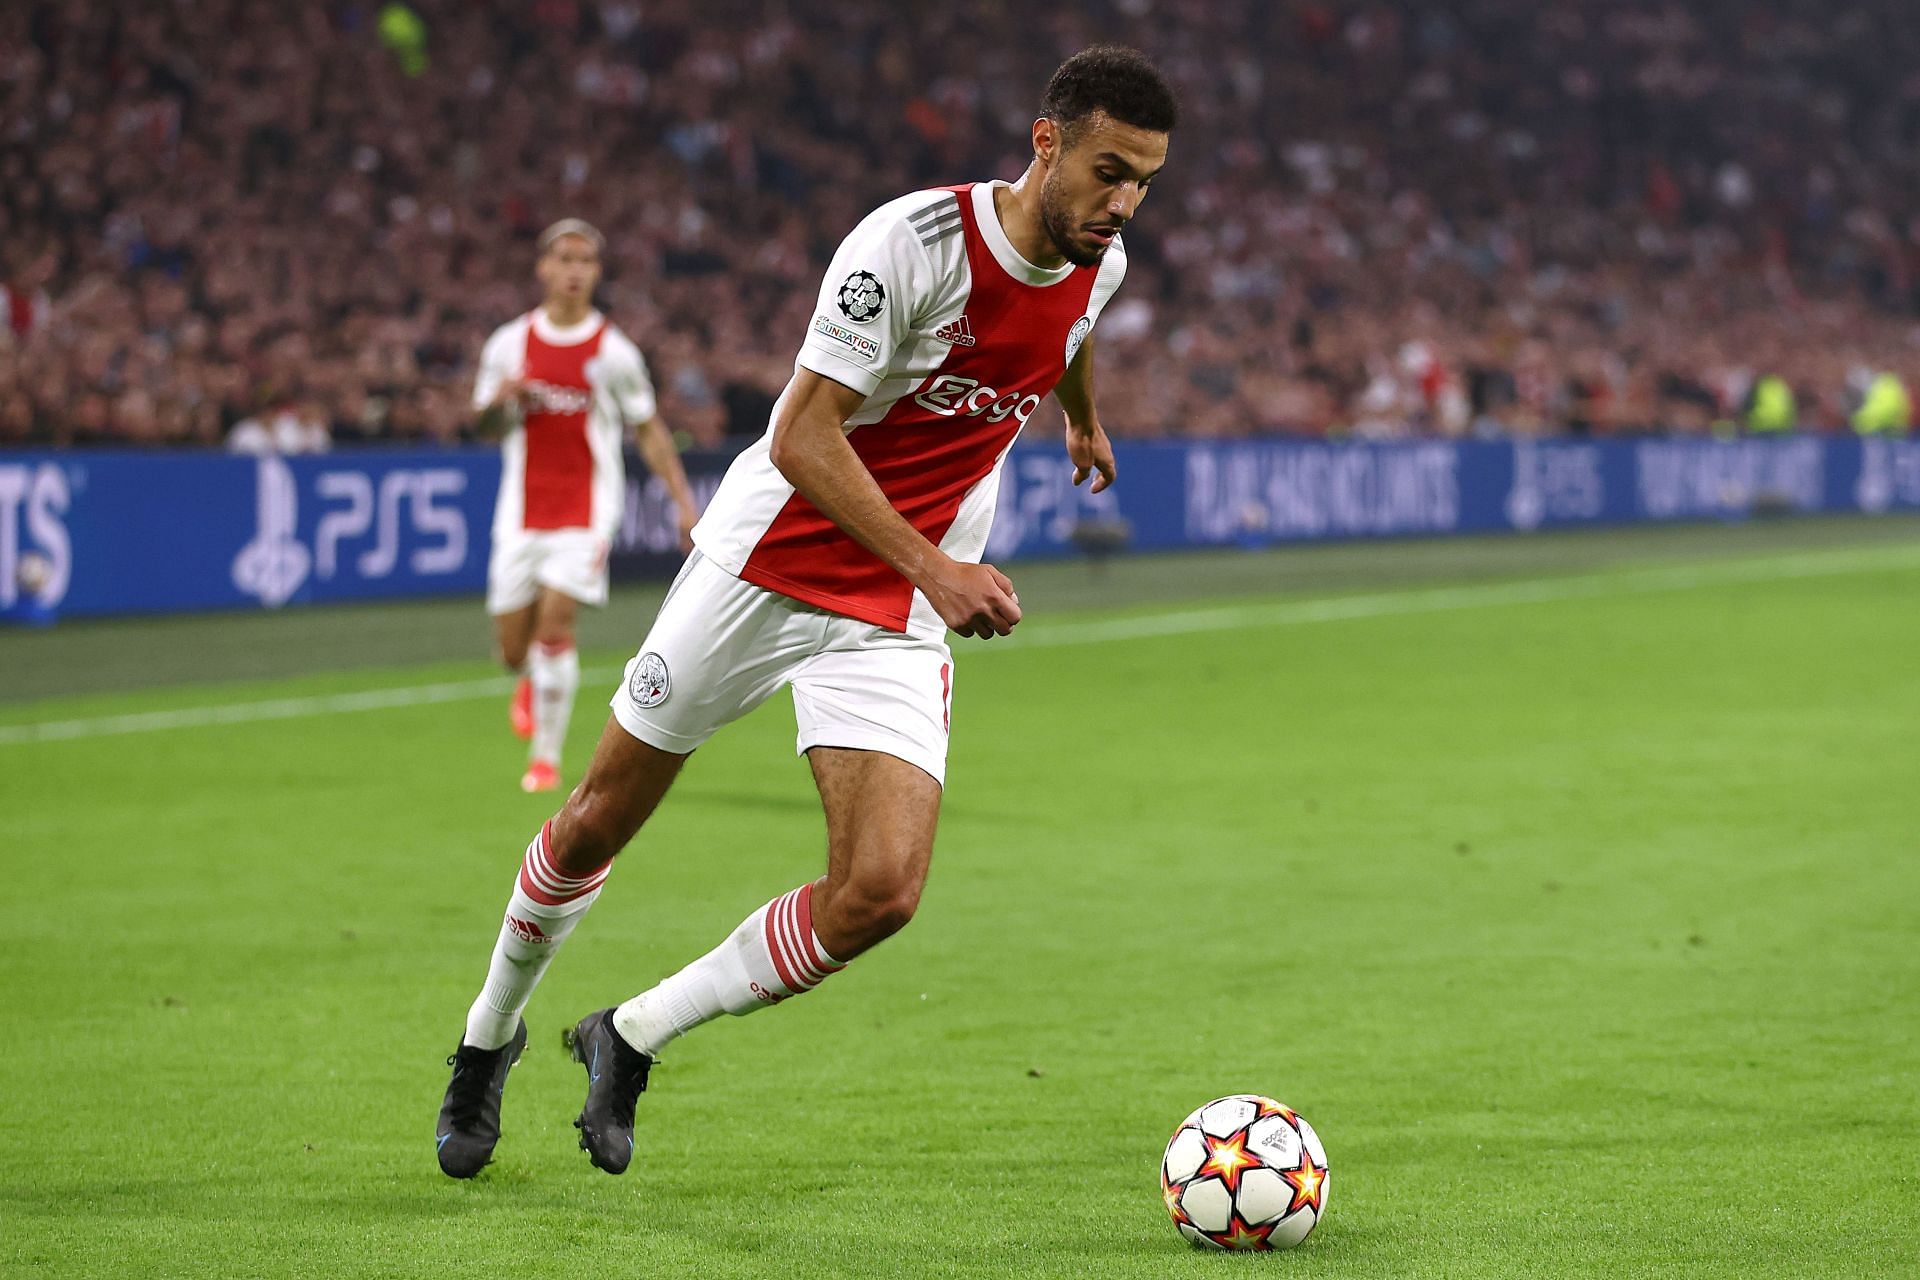 Arsenal could face competition from Manchester United for the signature of Noussair Mazraoui.